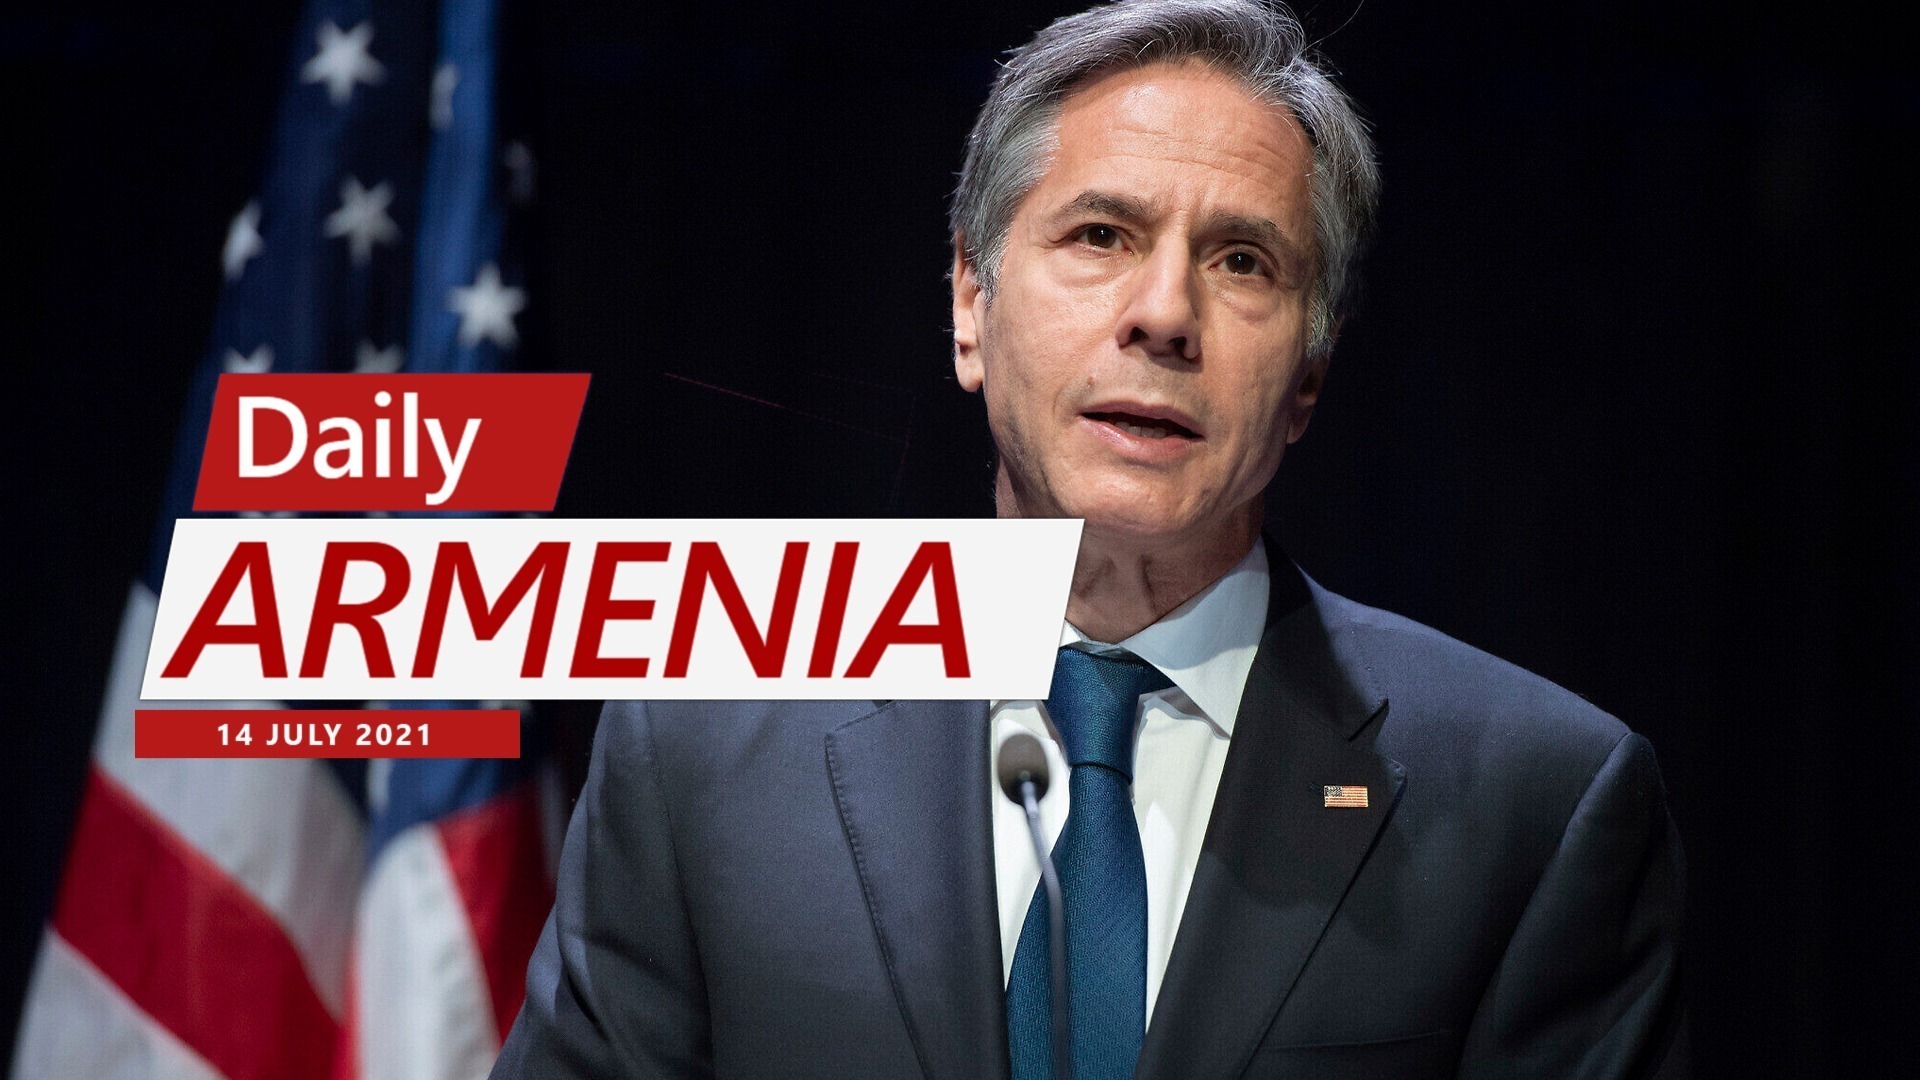 US Secretary of State pledges to continue efforts to return Armenian POWs